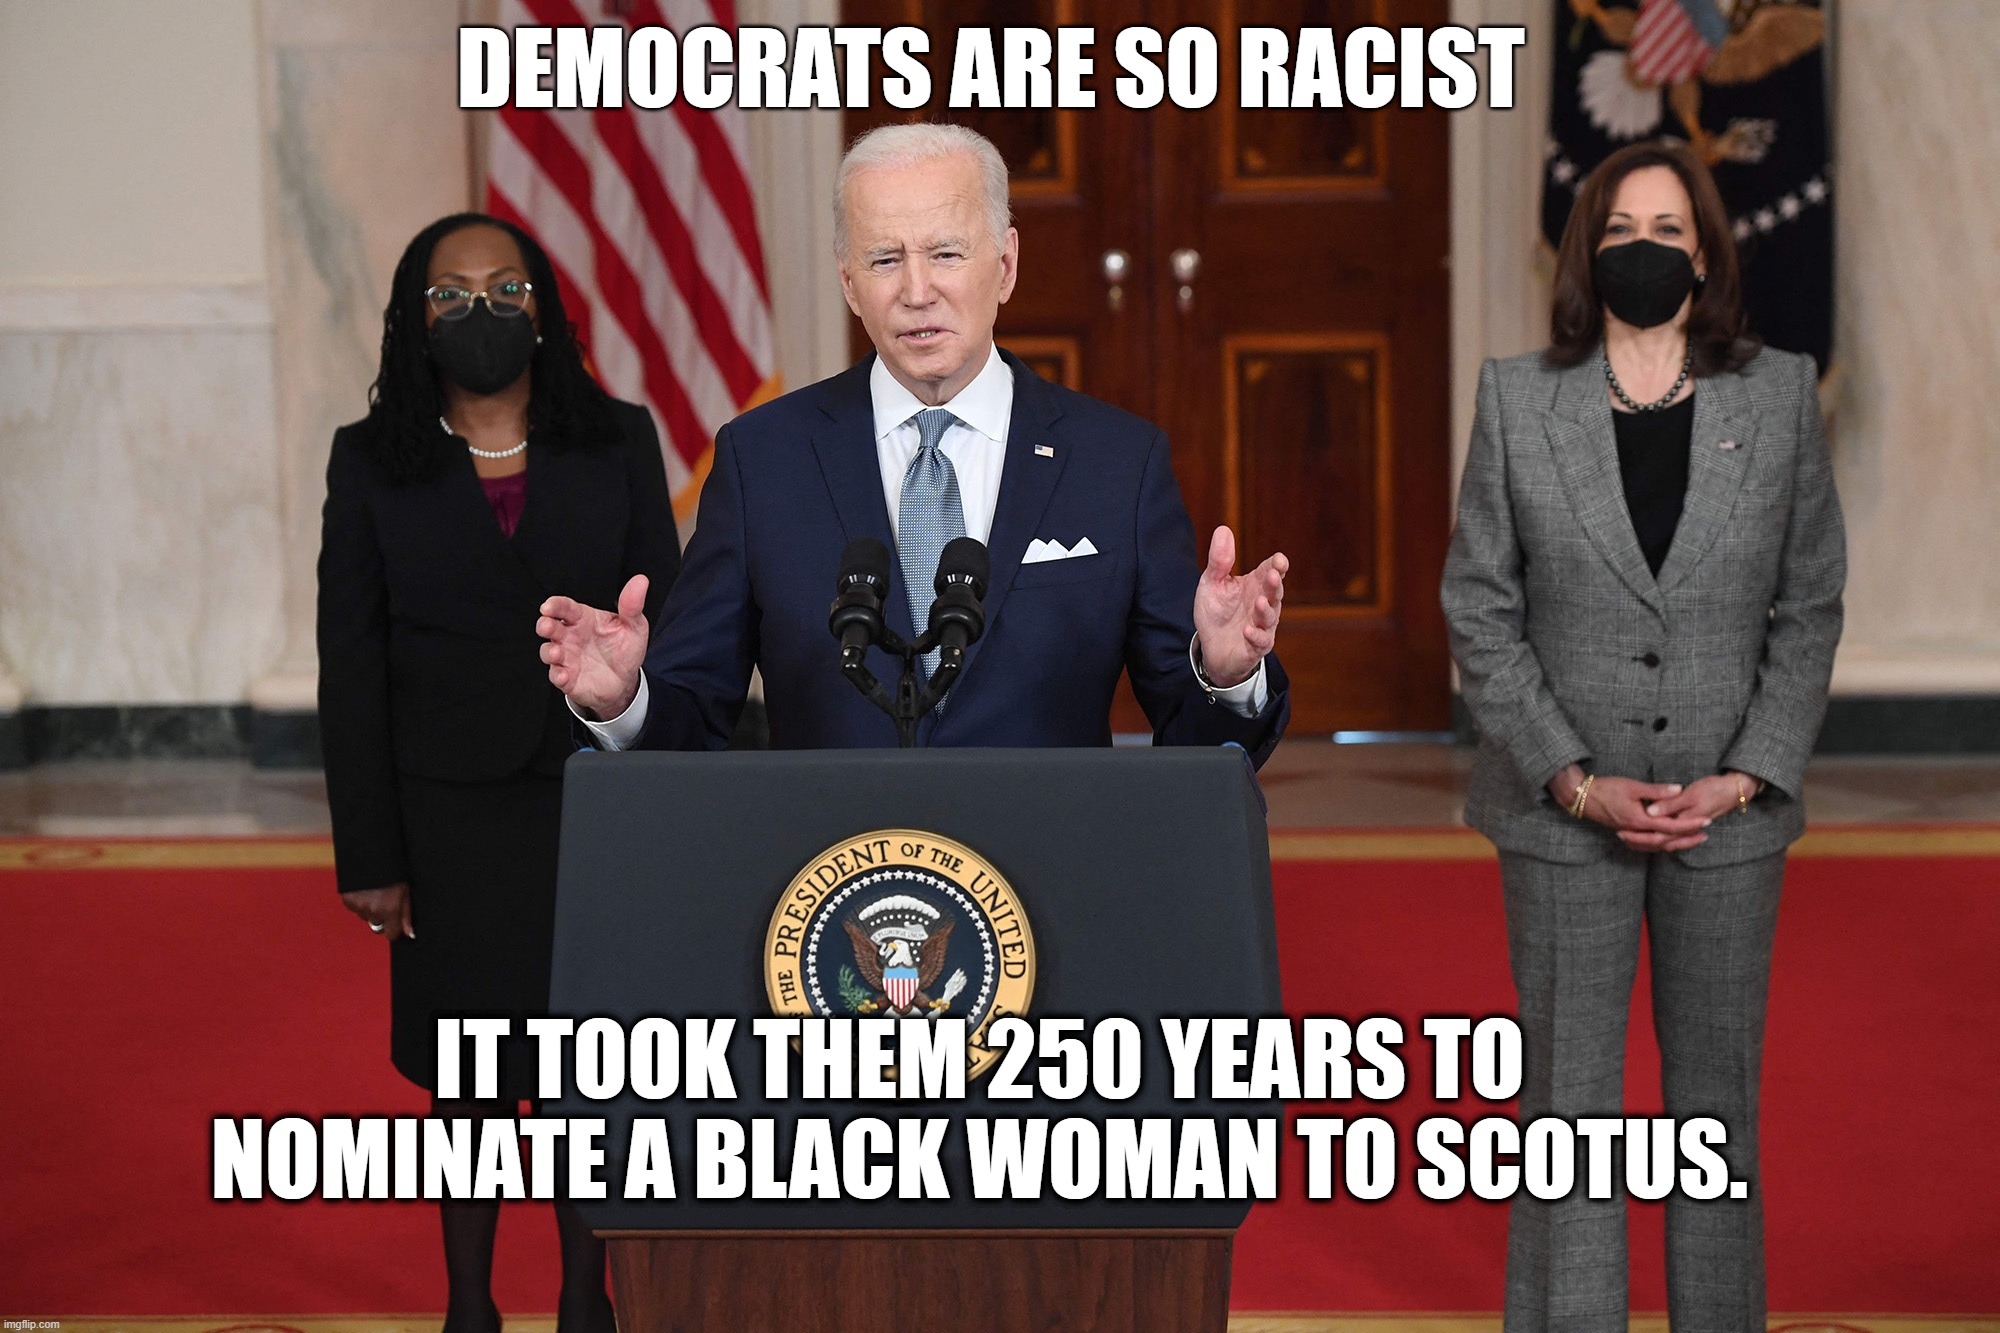 Baby steps for baby people | DEMOCRATS ARE SO RACIST; IT TOOK THEM 250 YEARS TO NOMINATE A BLACK WOMAN TO SCOTUS. | image tagged in joe biden,scotus,ketanji brown jackson,democrats,racist | made w/ Imgflip meme maker